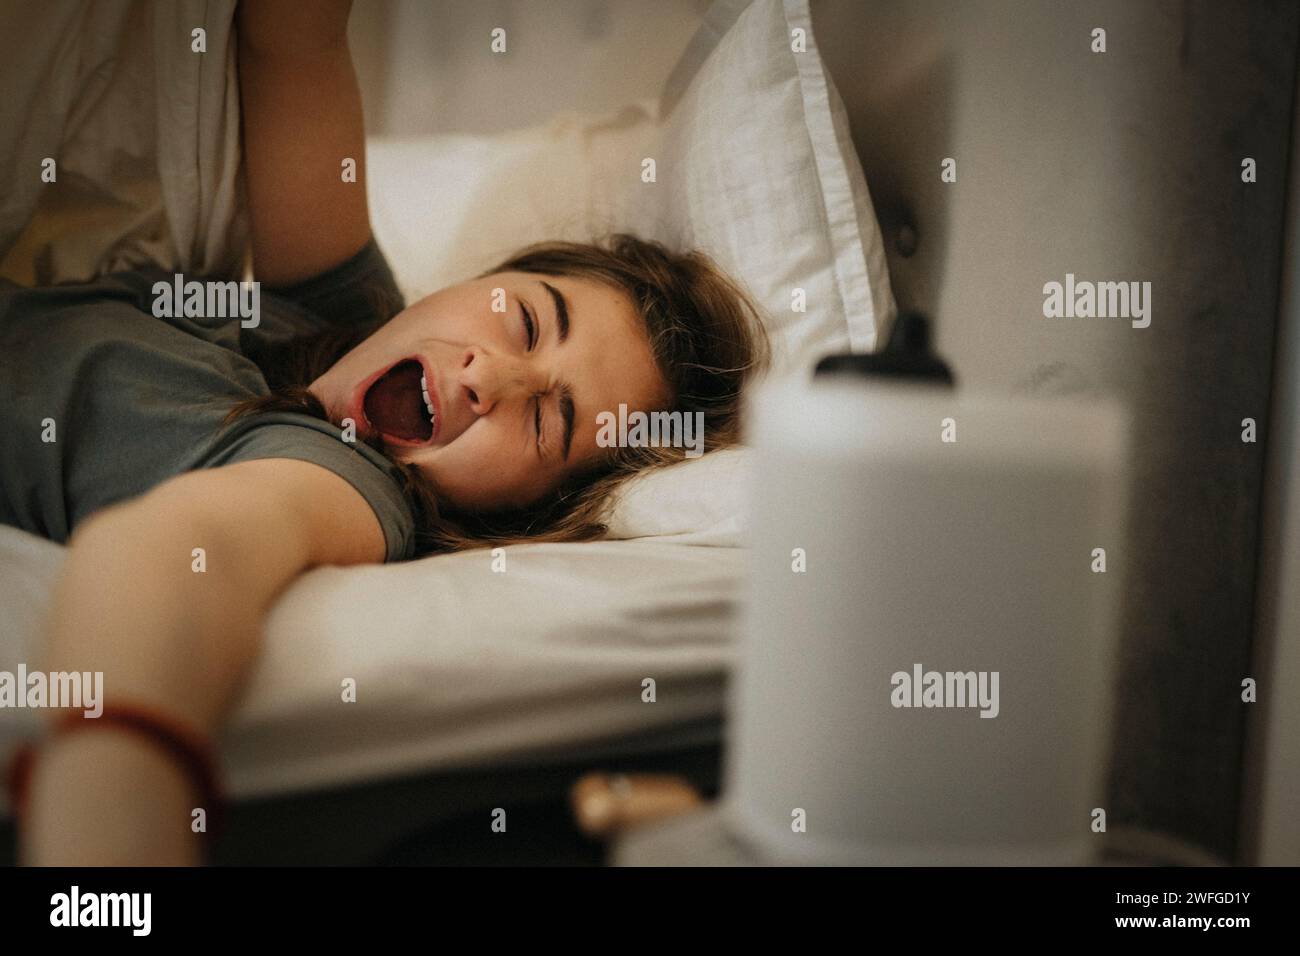 Girl yawning on bed while waking up in morning at home Stock Photo